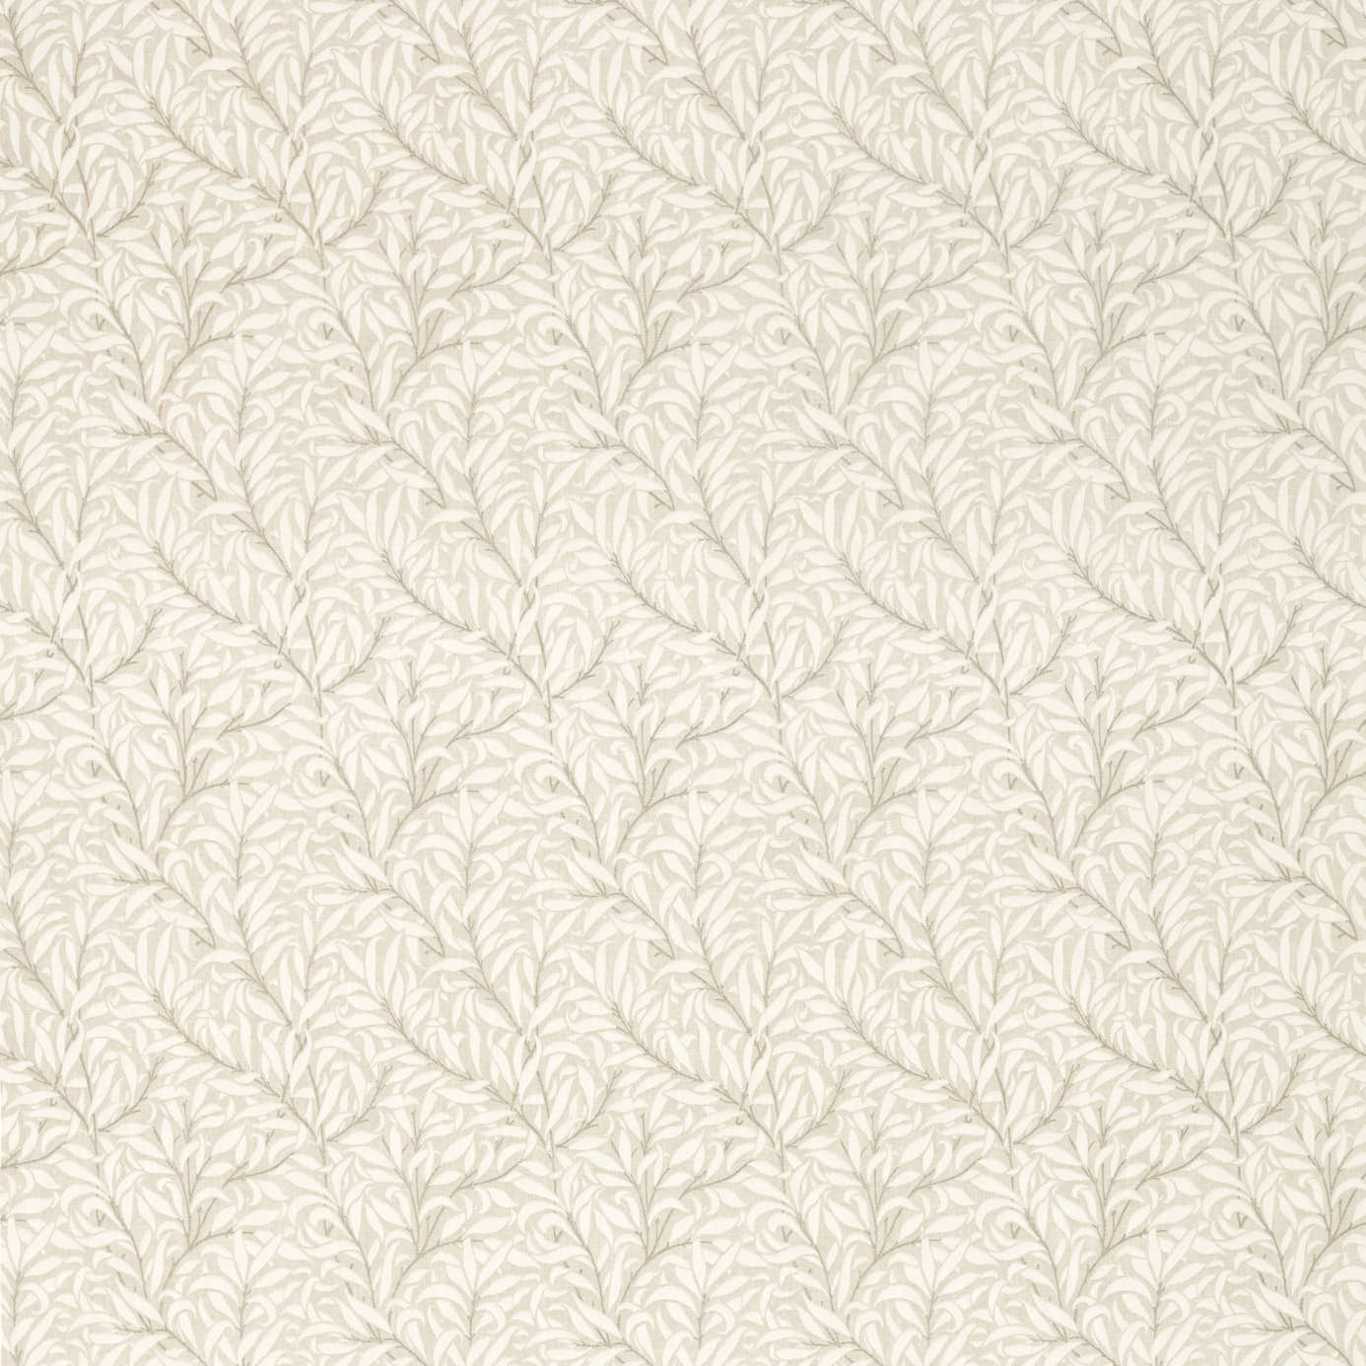 Pure Willow Boughs Print Linen Fabric by MOR